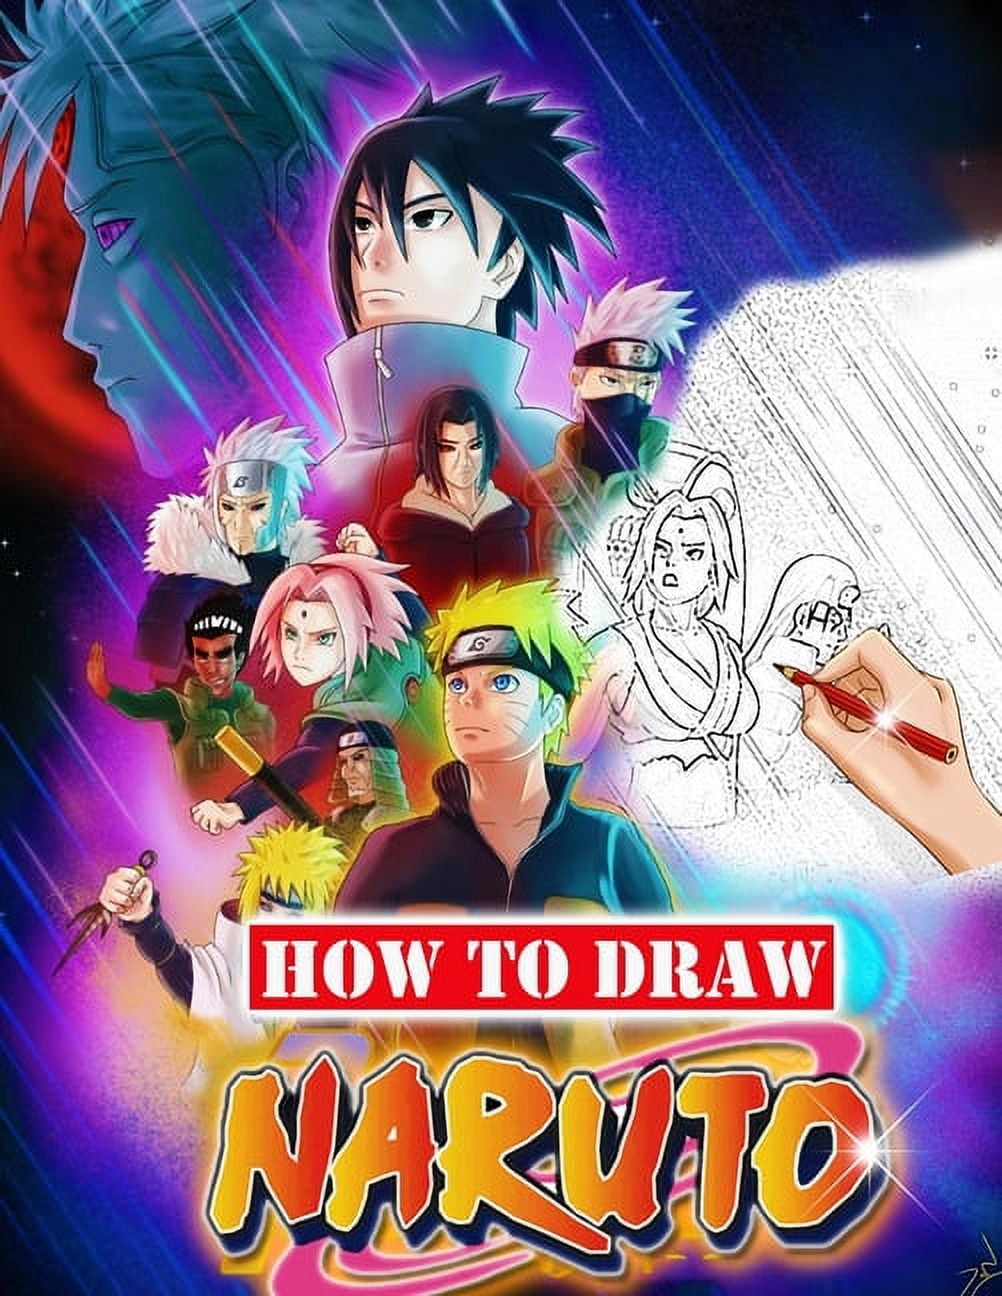 I wish i can draw all naruto's characters here Just like the movie